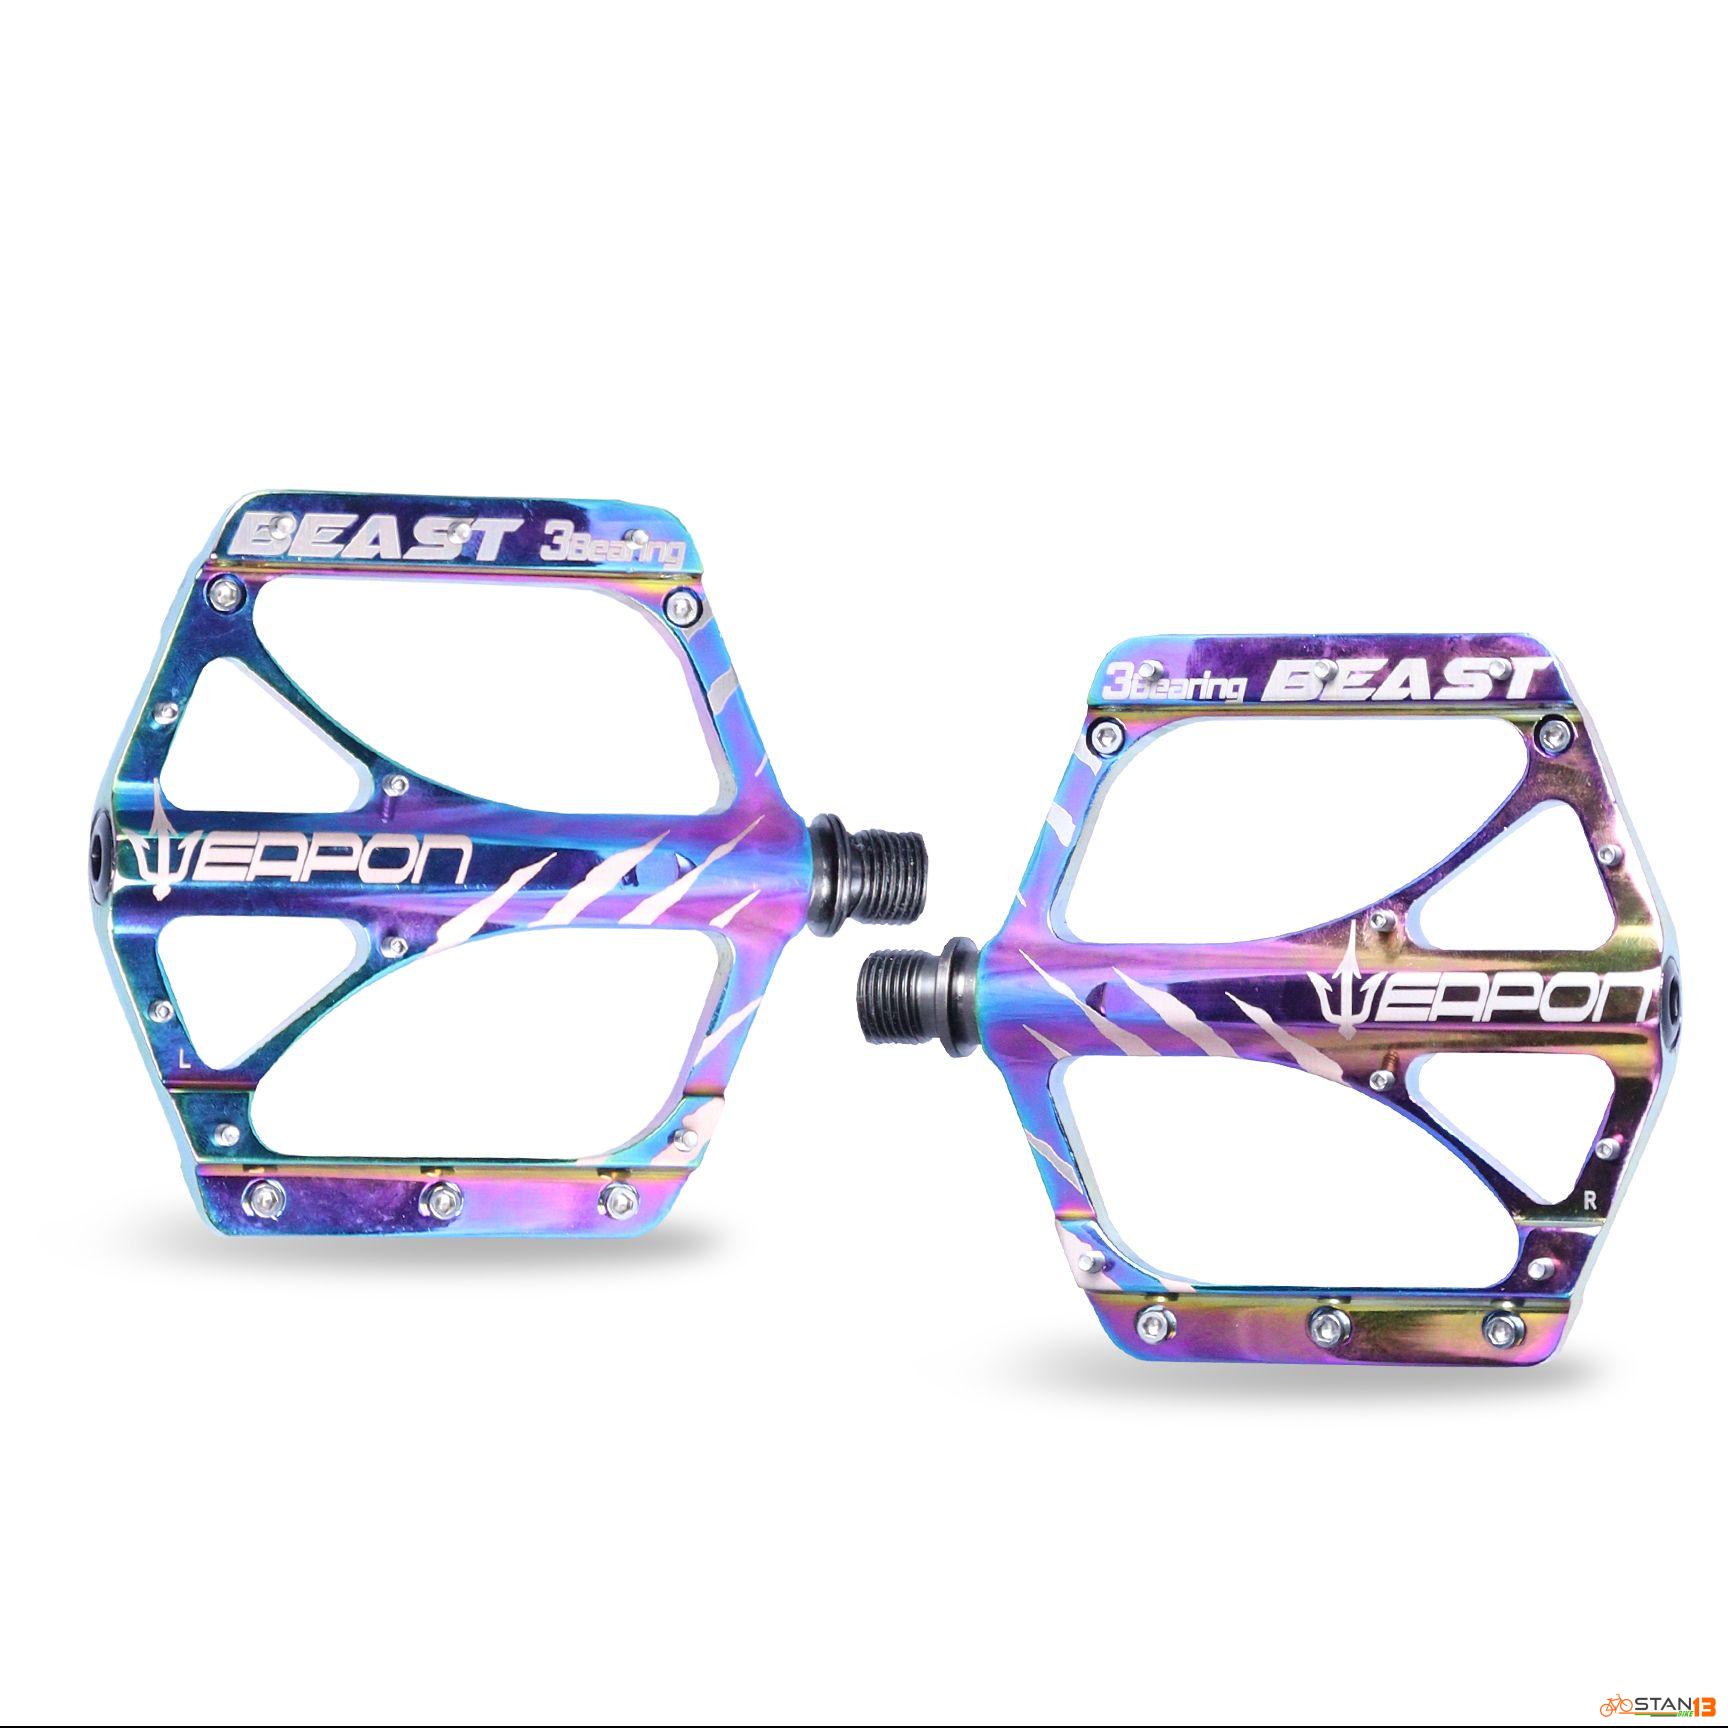 Pedal Weapon Beast Oil Slick Pedals 3 Sealed Bearings Super Smooth